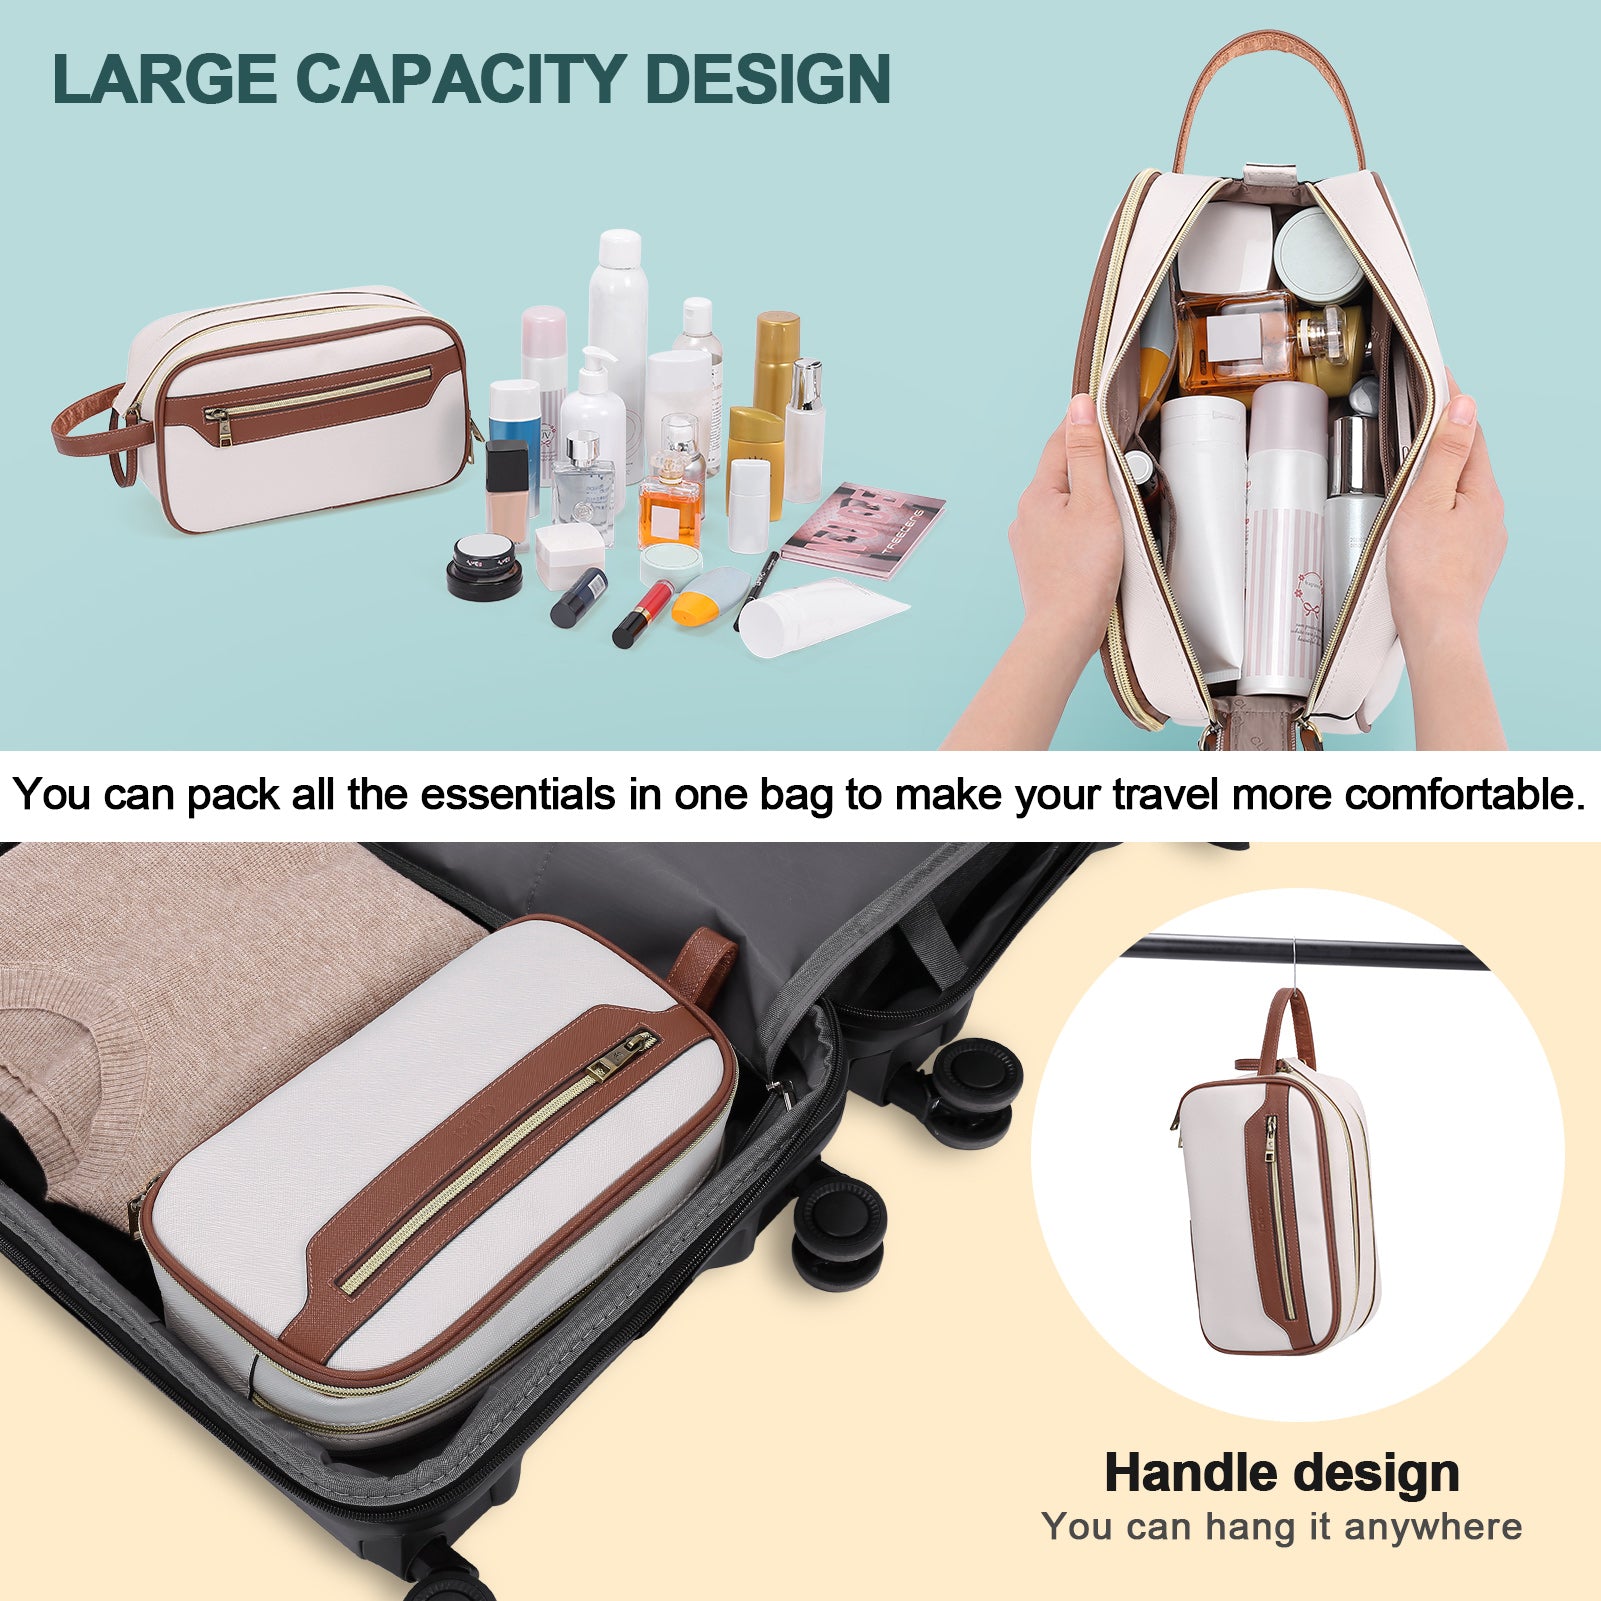 CLUCI Travel Toiletry Bag for Women/ Men, Water-resistant Shaving Bag for Toiletries Accessories with Divider and Handle for Cosmetics Toiletries Brushes Tools